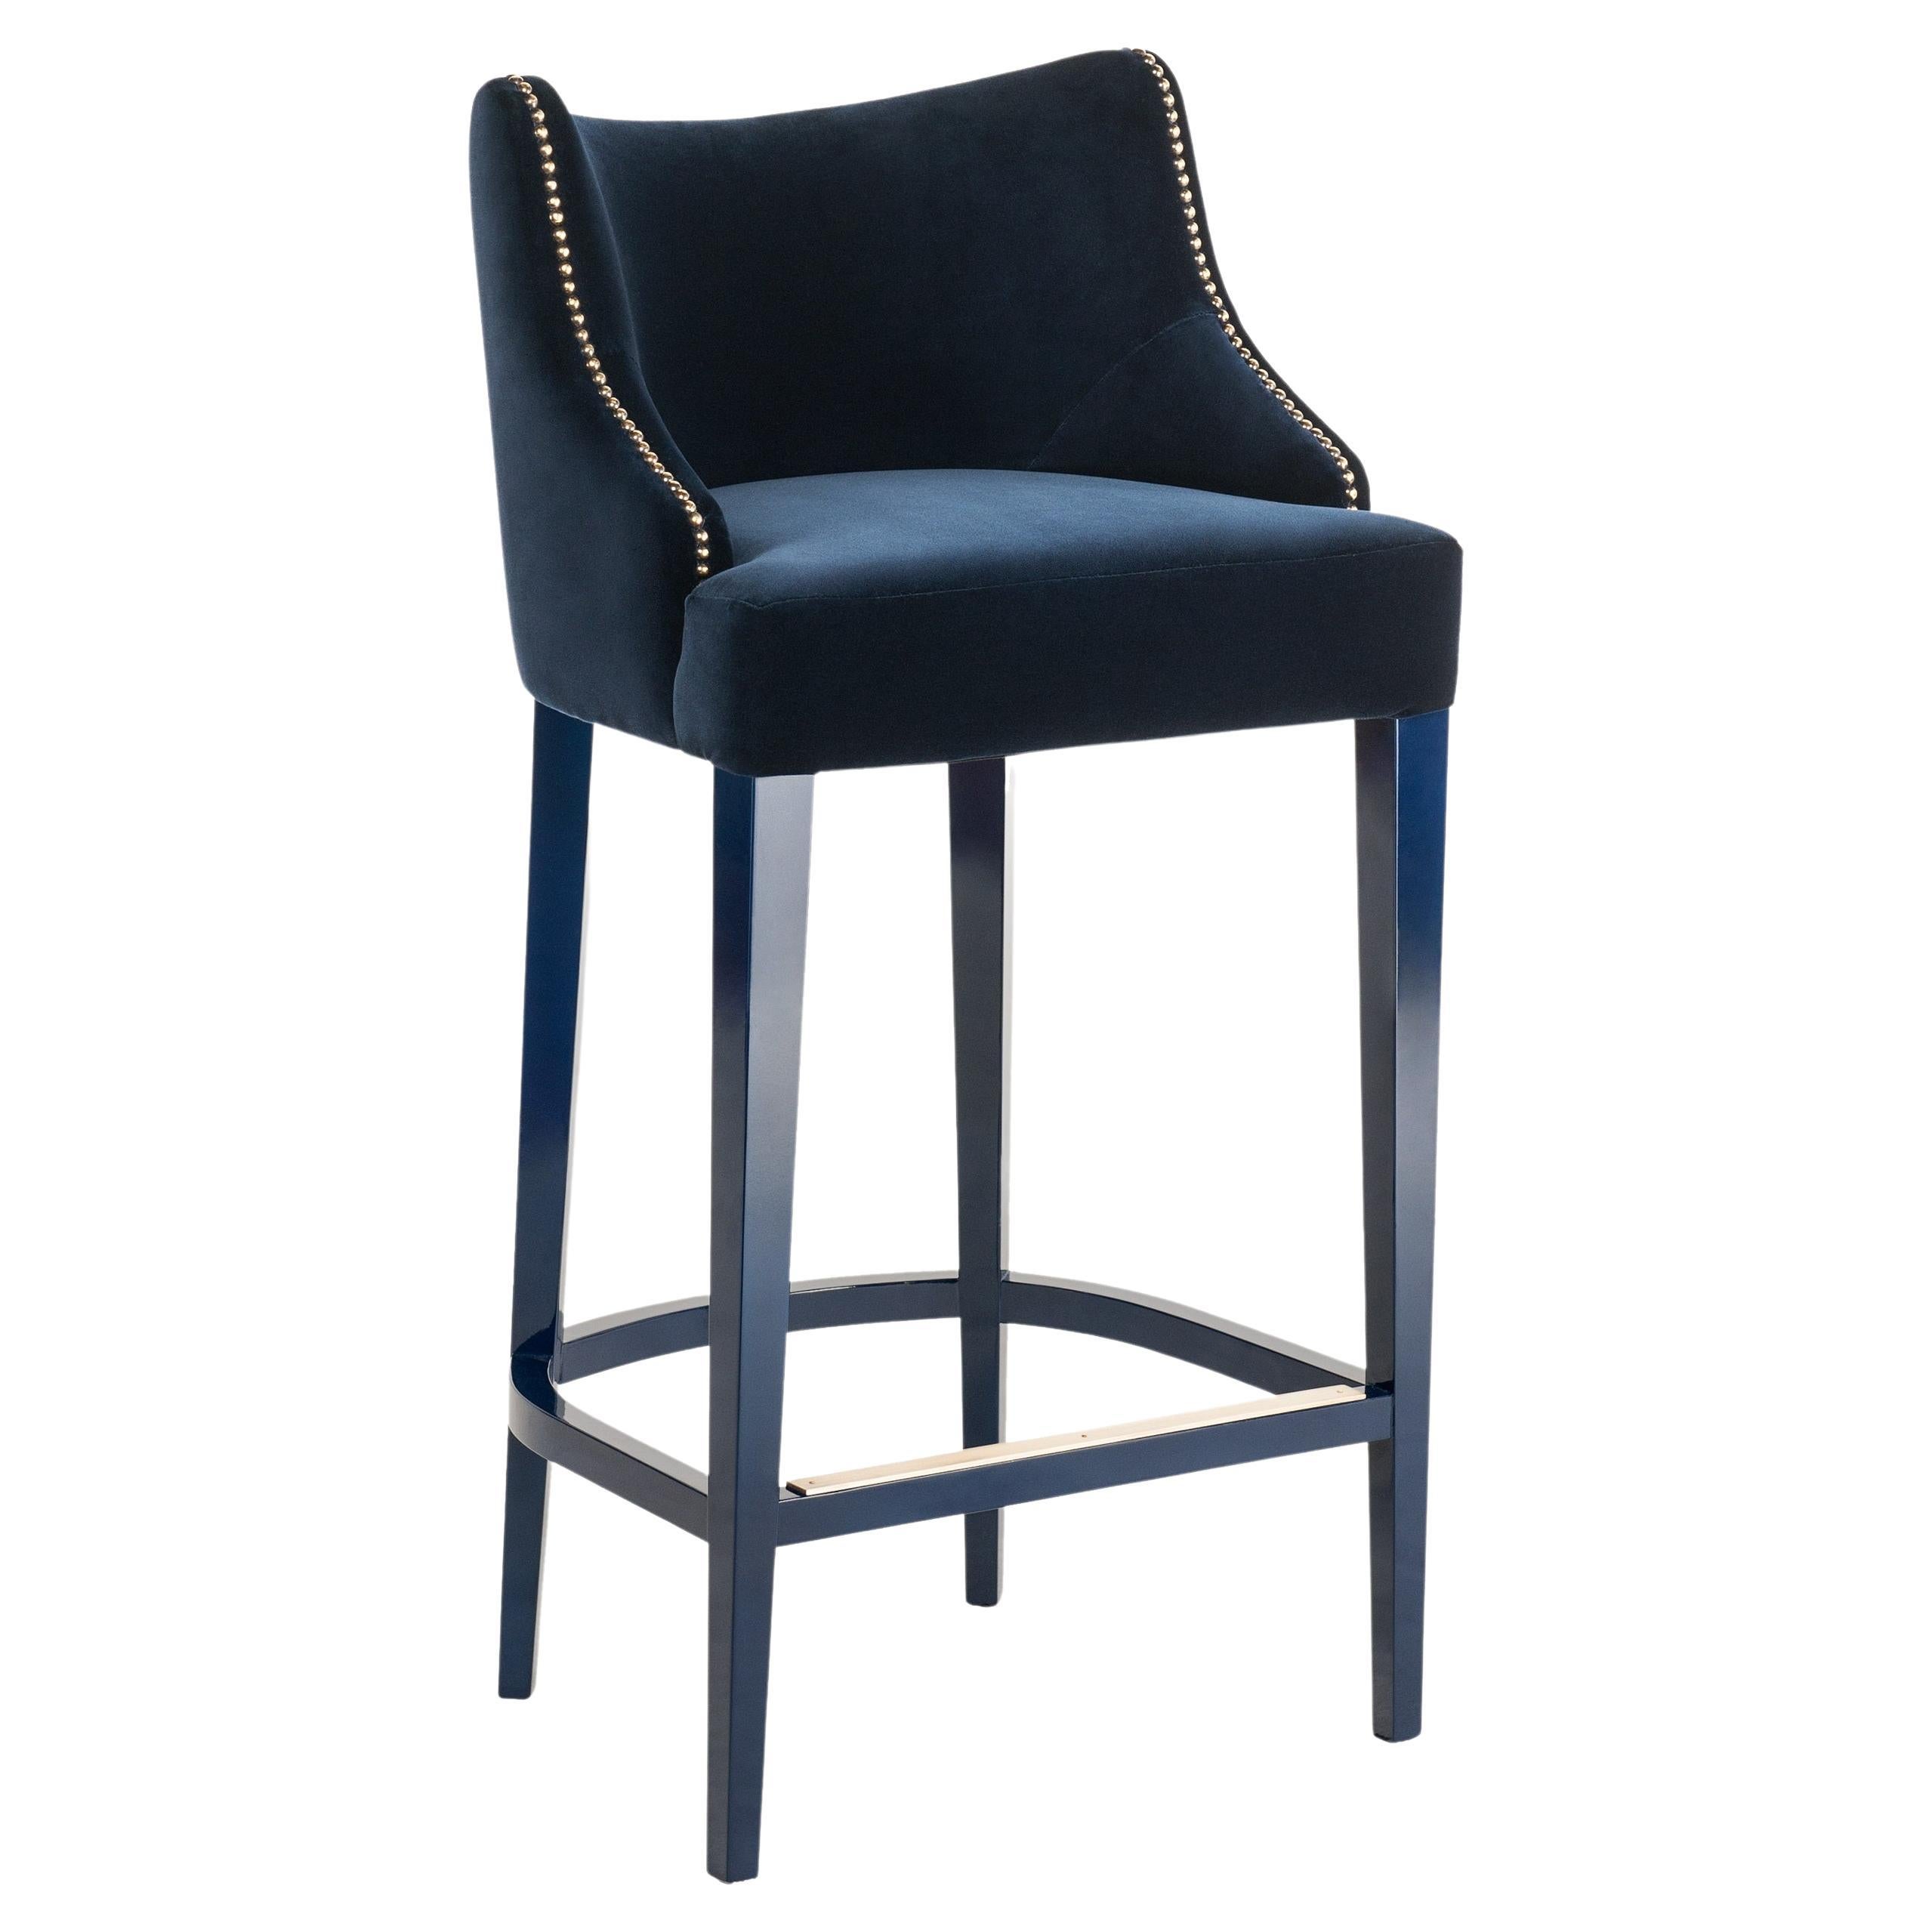 Contemporary Barstool Offered with Nails on the Curve & Back For Sale